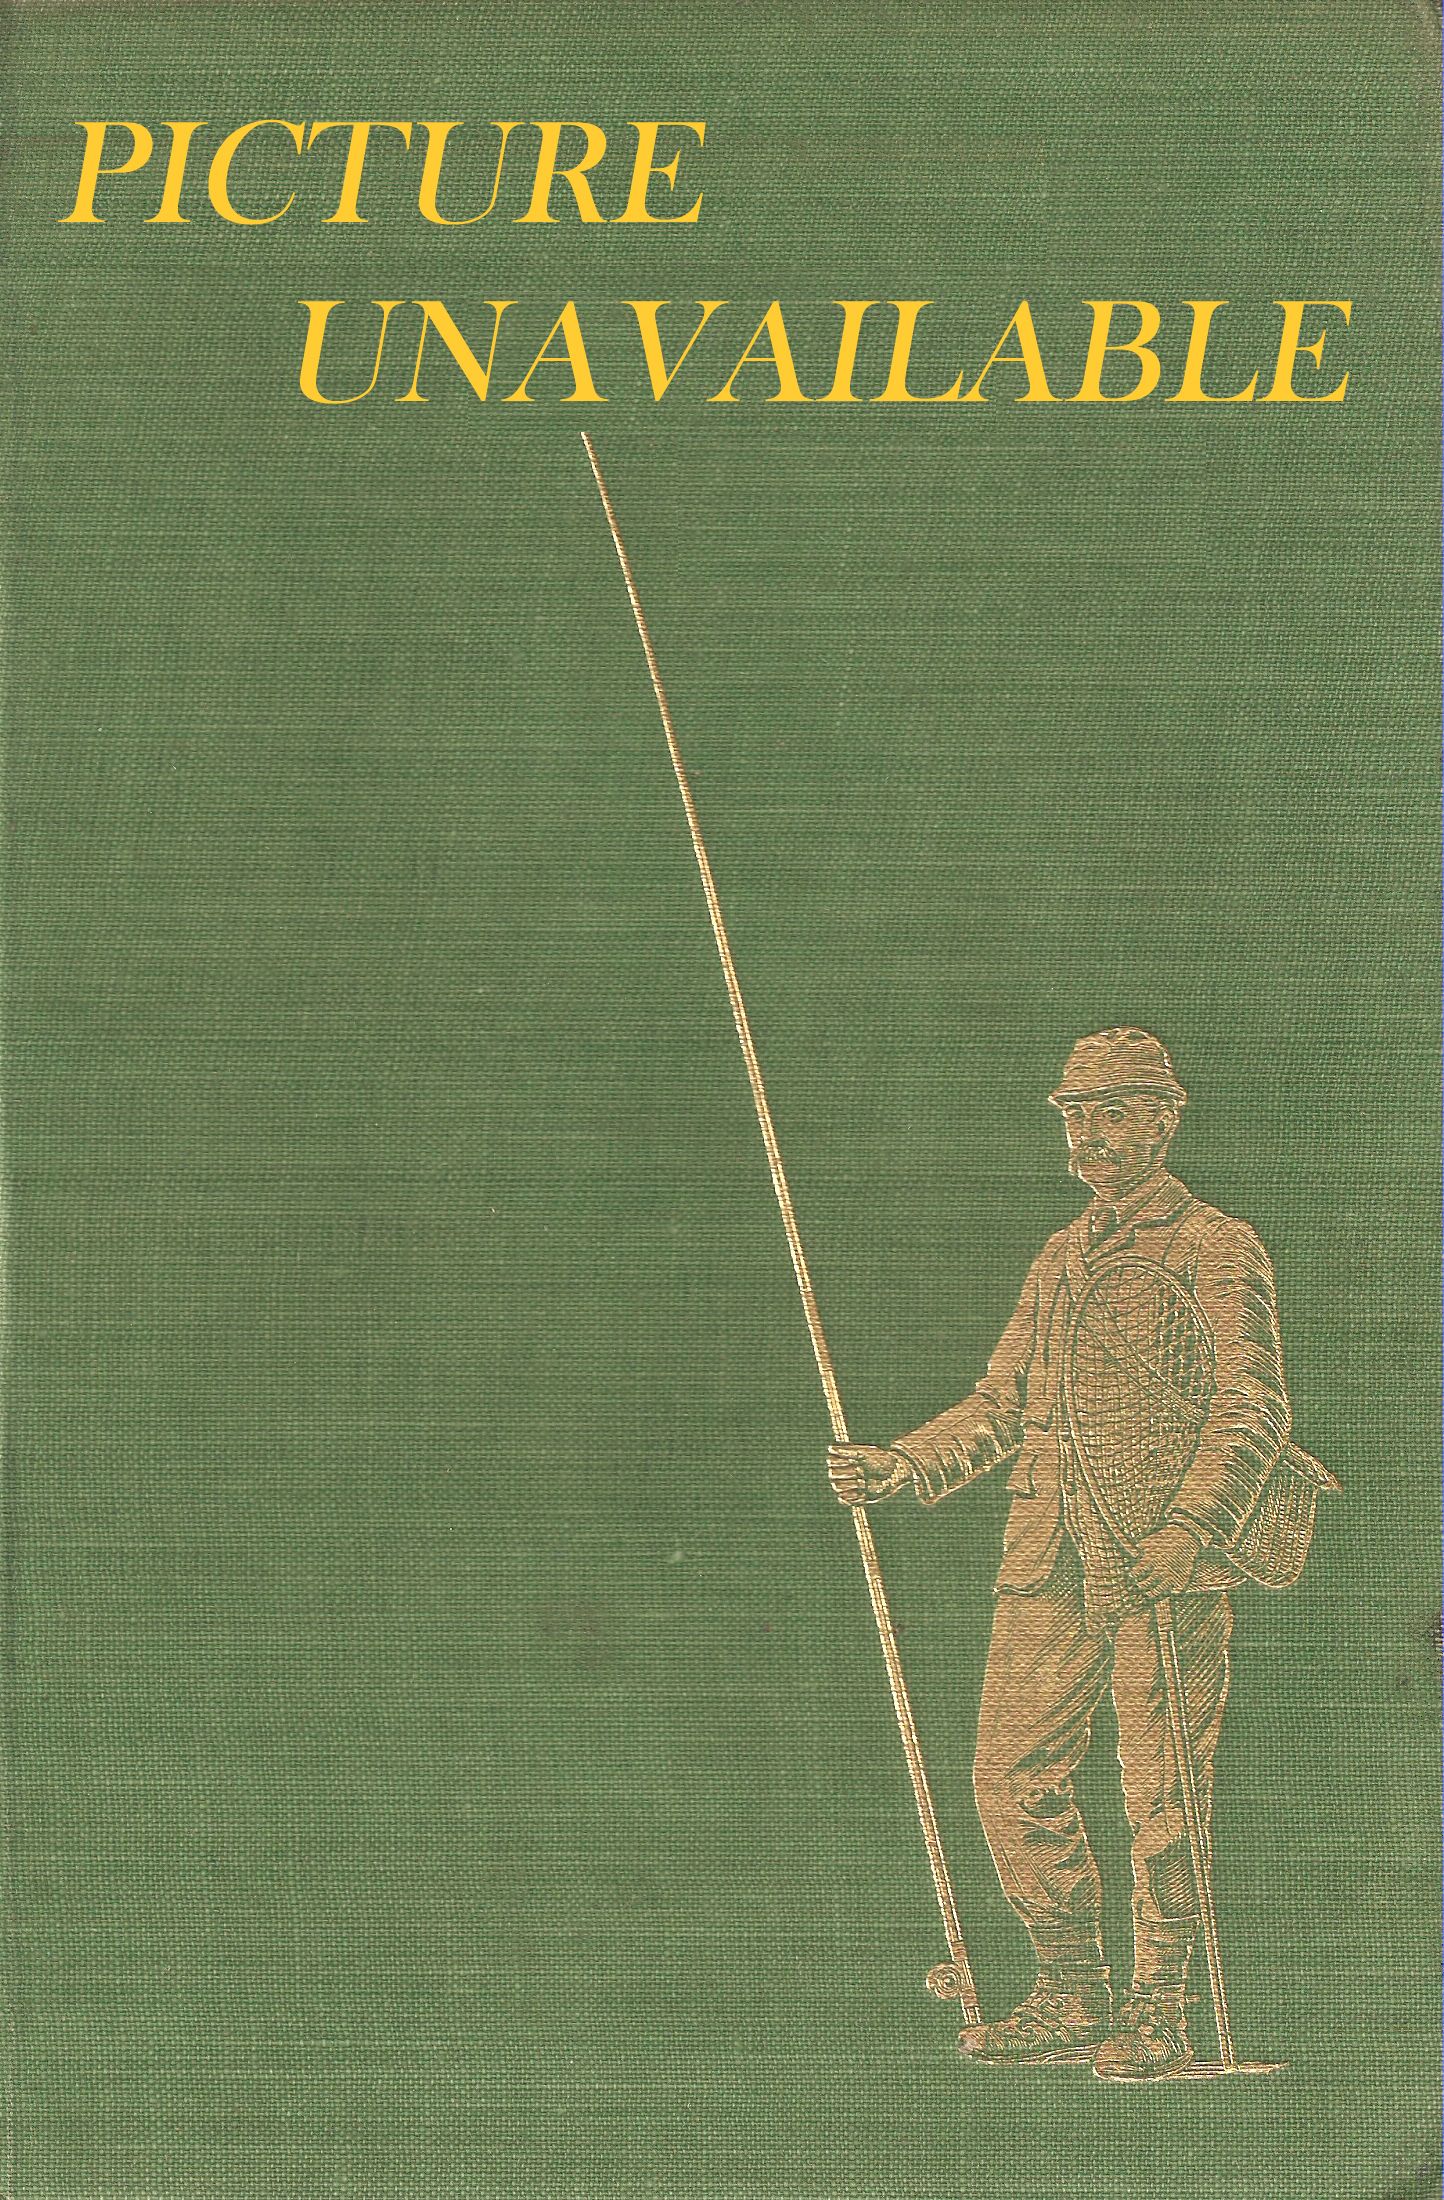 POWNALL'S ANGLERS GUIDE. EAST SUFFOLK AND NORFOLK BROADS and RIVERS: Where  to fish and how to get there. Complete with 7 detailed maps of rivers,  specially selected broads, bus and rail routes including sea angling  supplement. (Revised 1976).